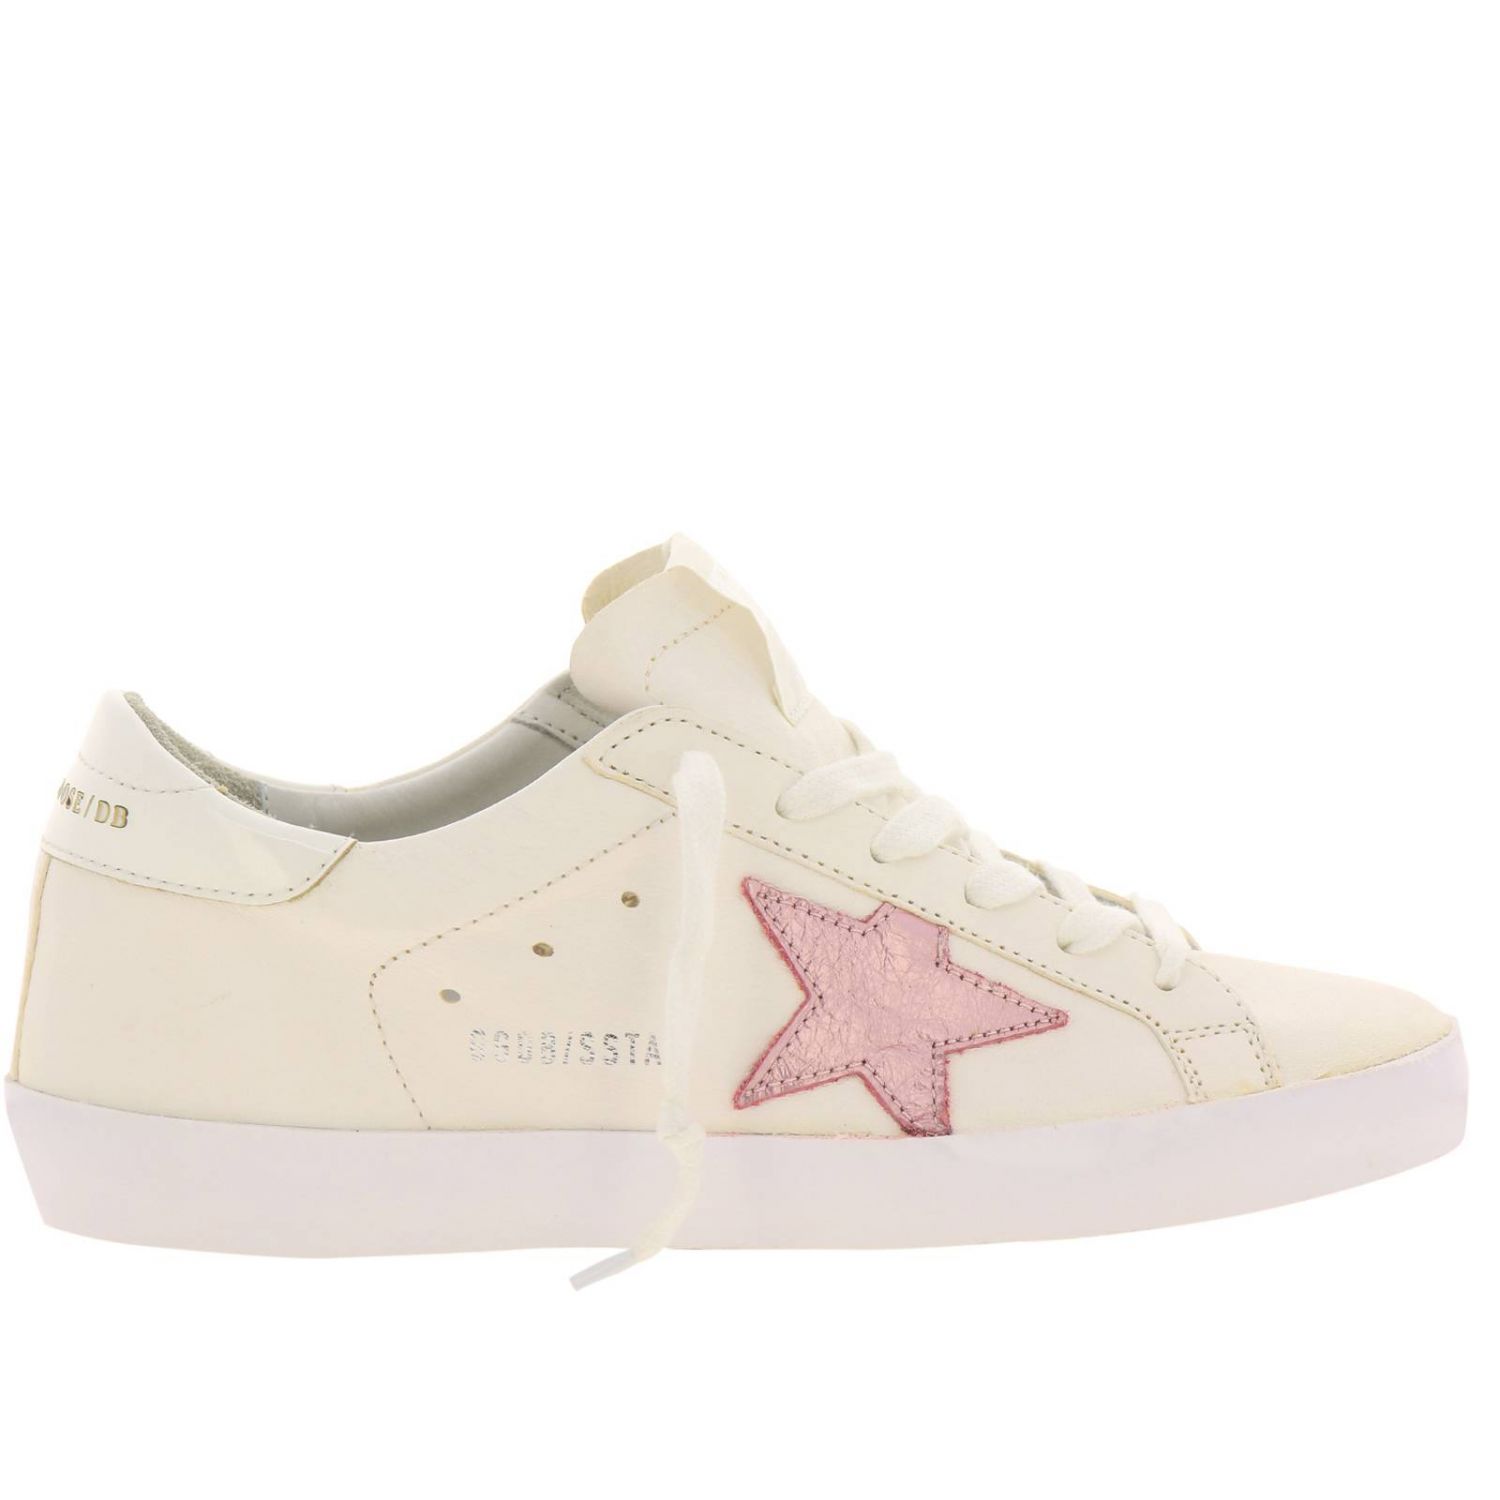 Golden Goose Outlet: Superstar sneakers in smooth leather with ...